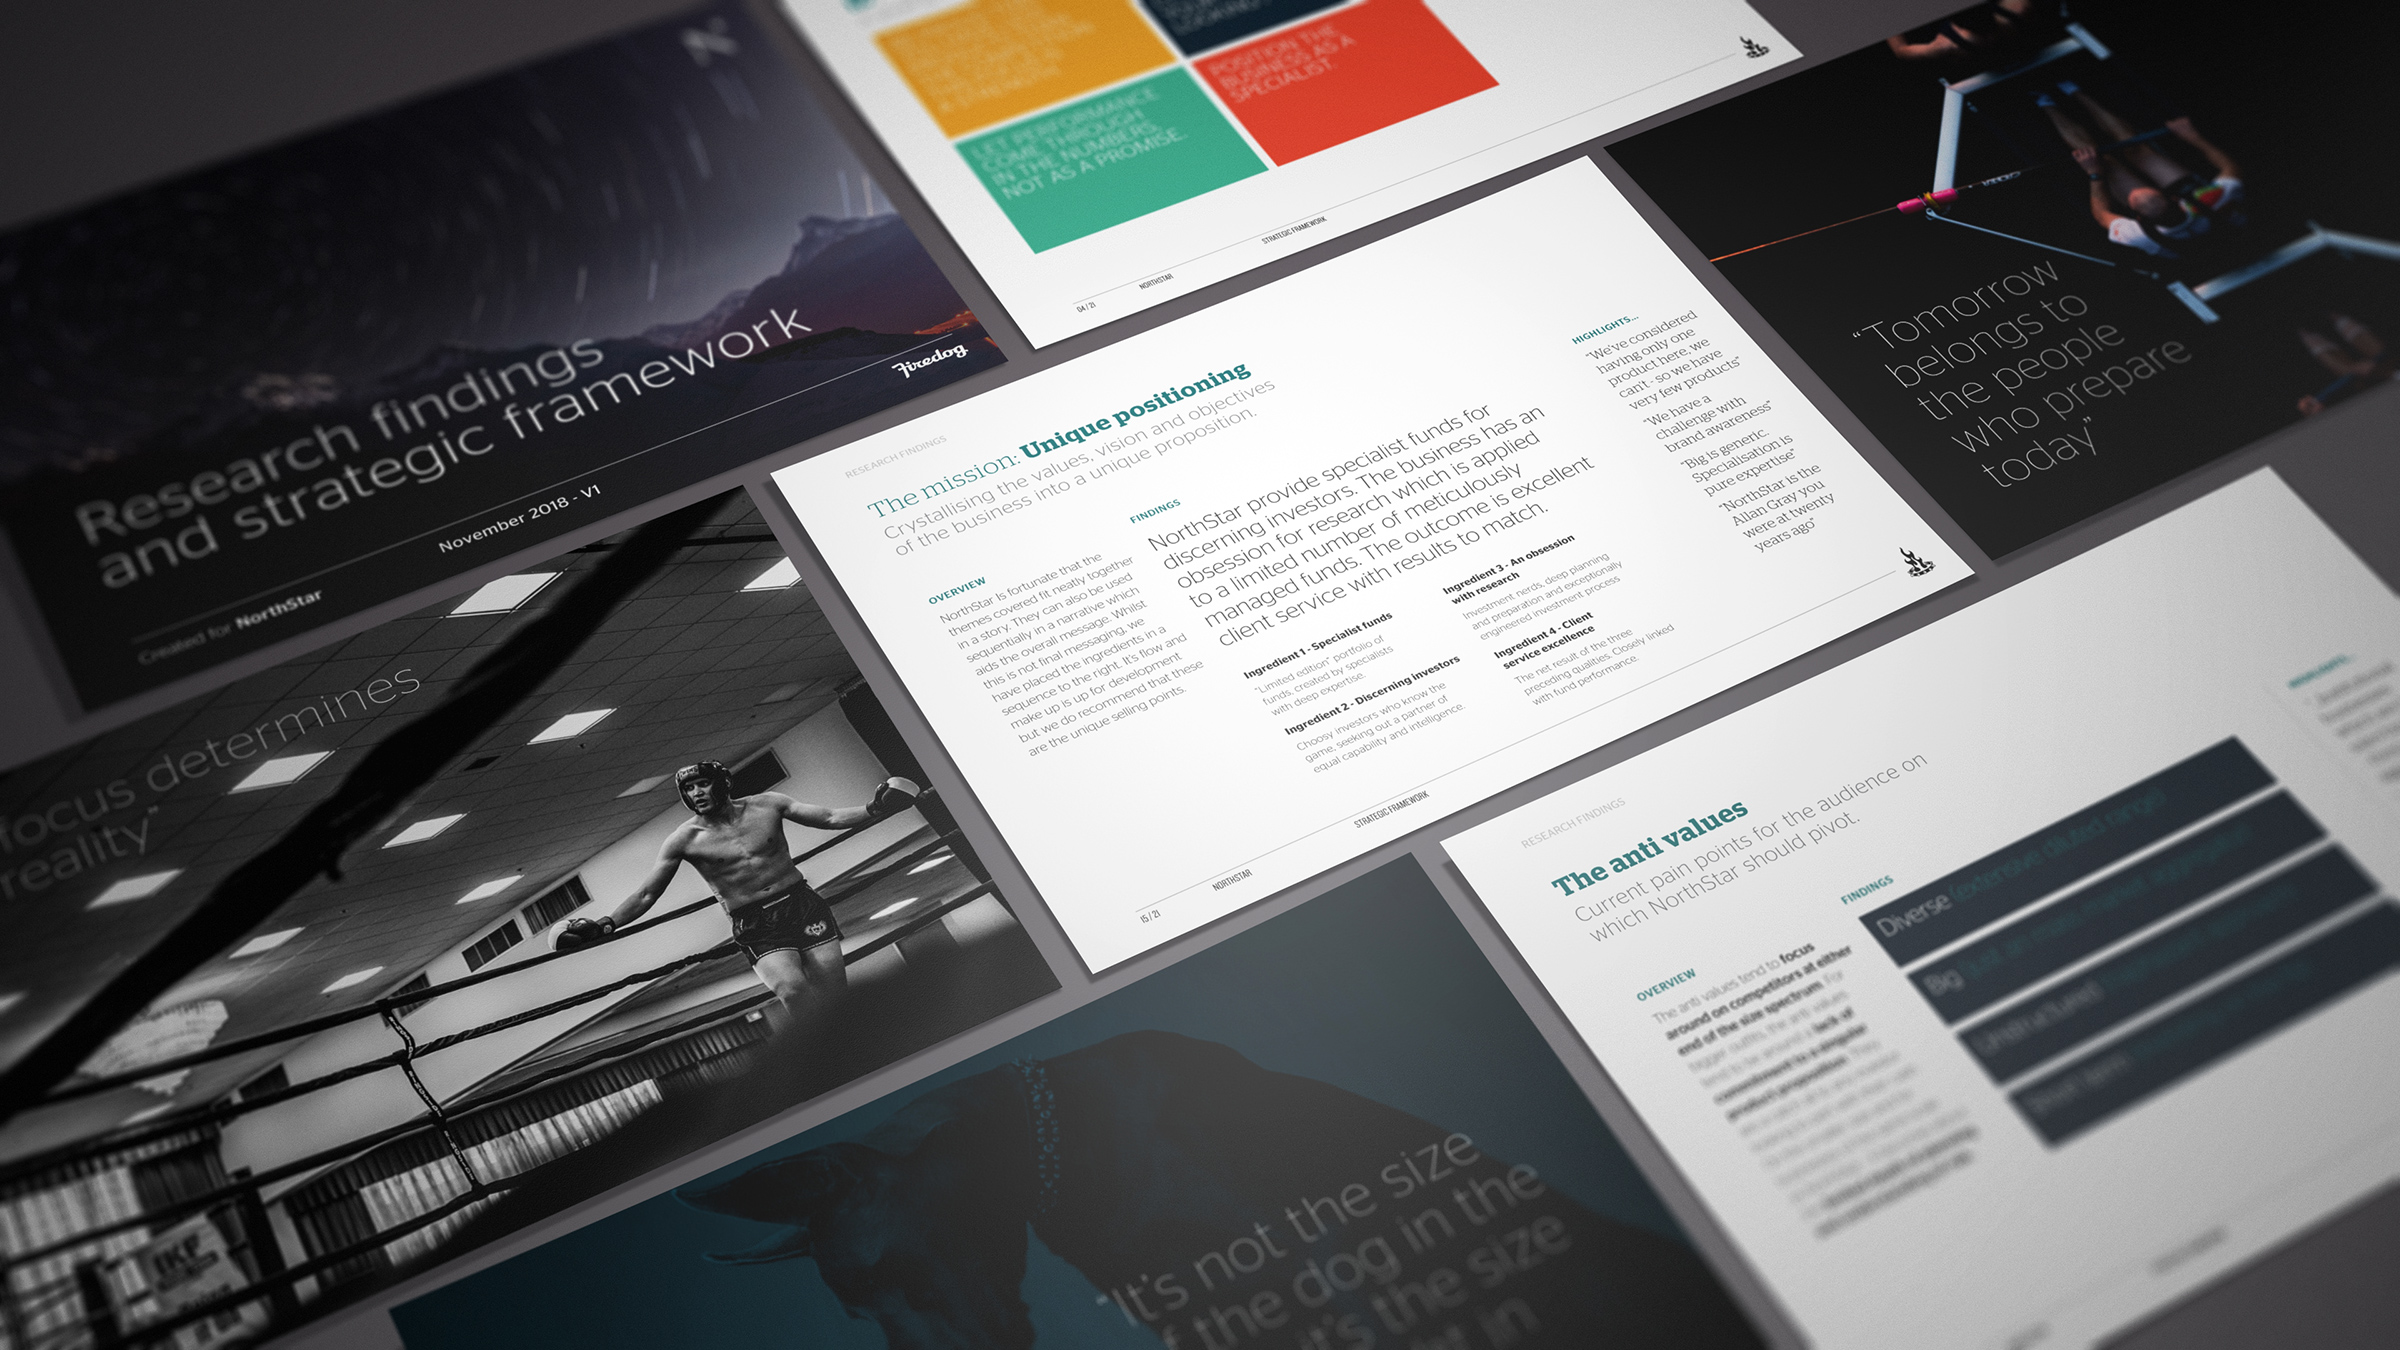 The results of our research efforts were distilled into a thirty page strategic framework that encompassed all the positioning and messaging requirements.